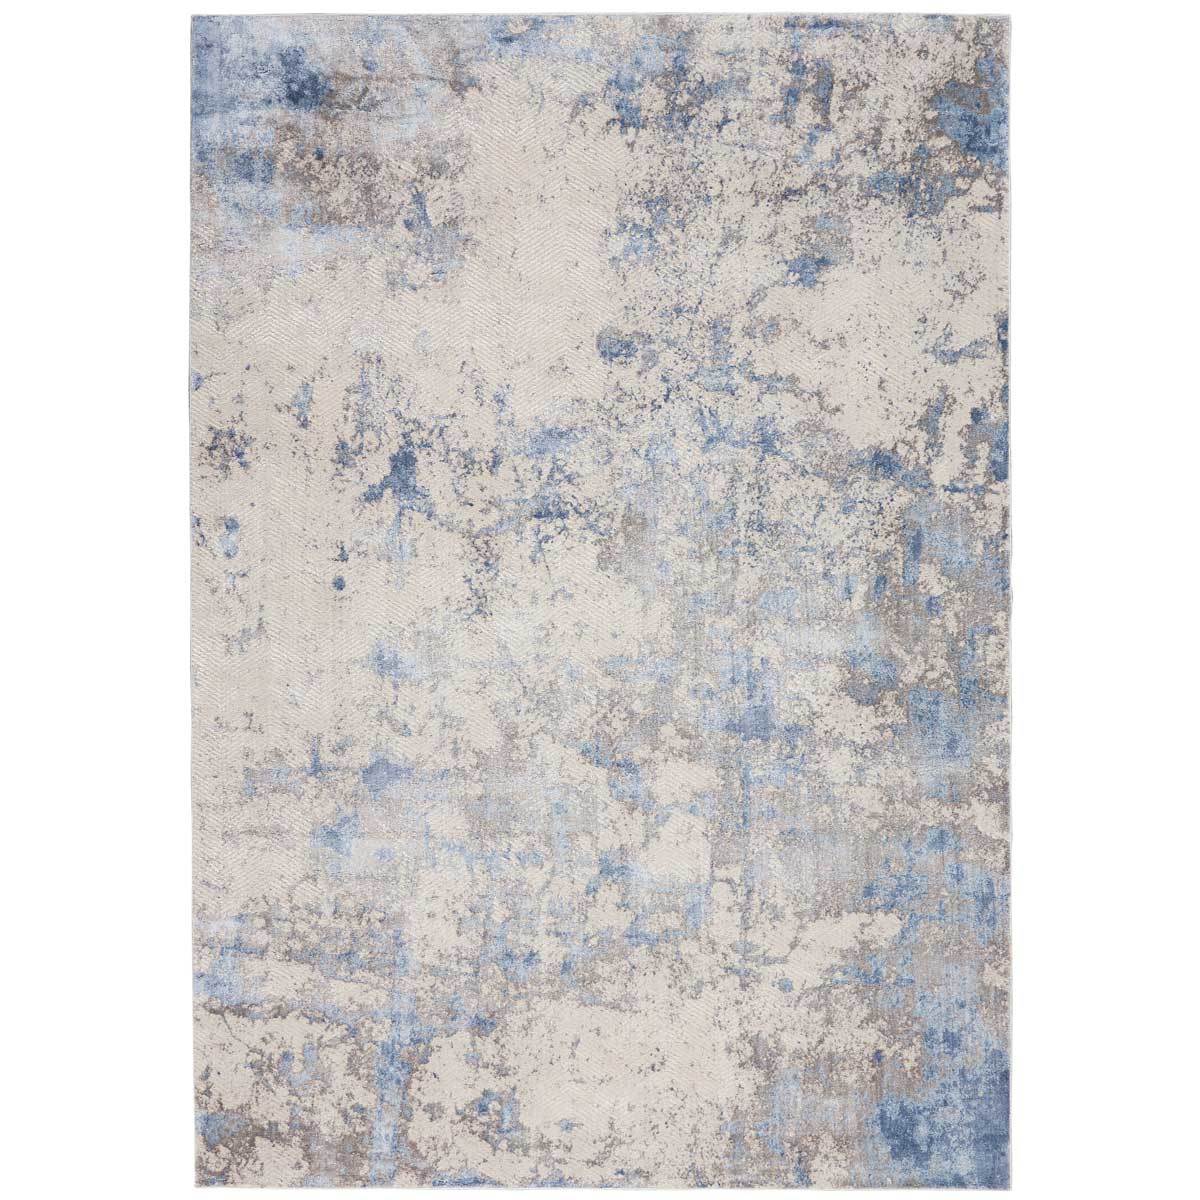 Silky Textures Blue Shimmer Rug, 160 x 221 cm | Costco UK